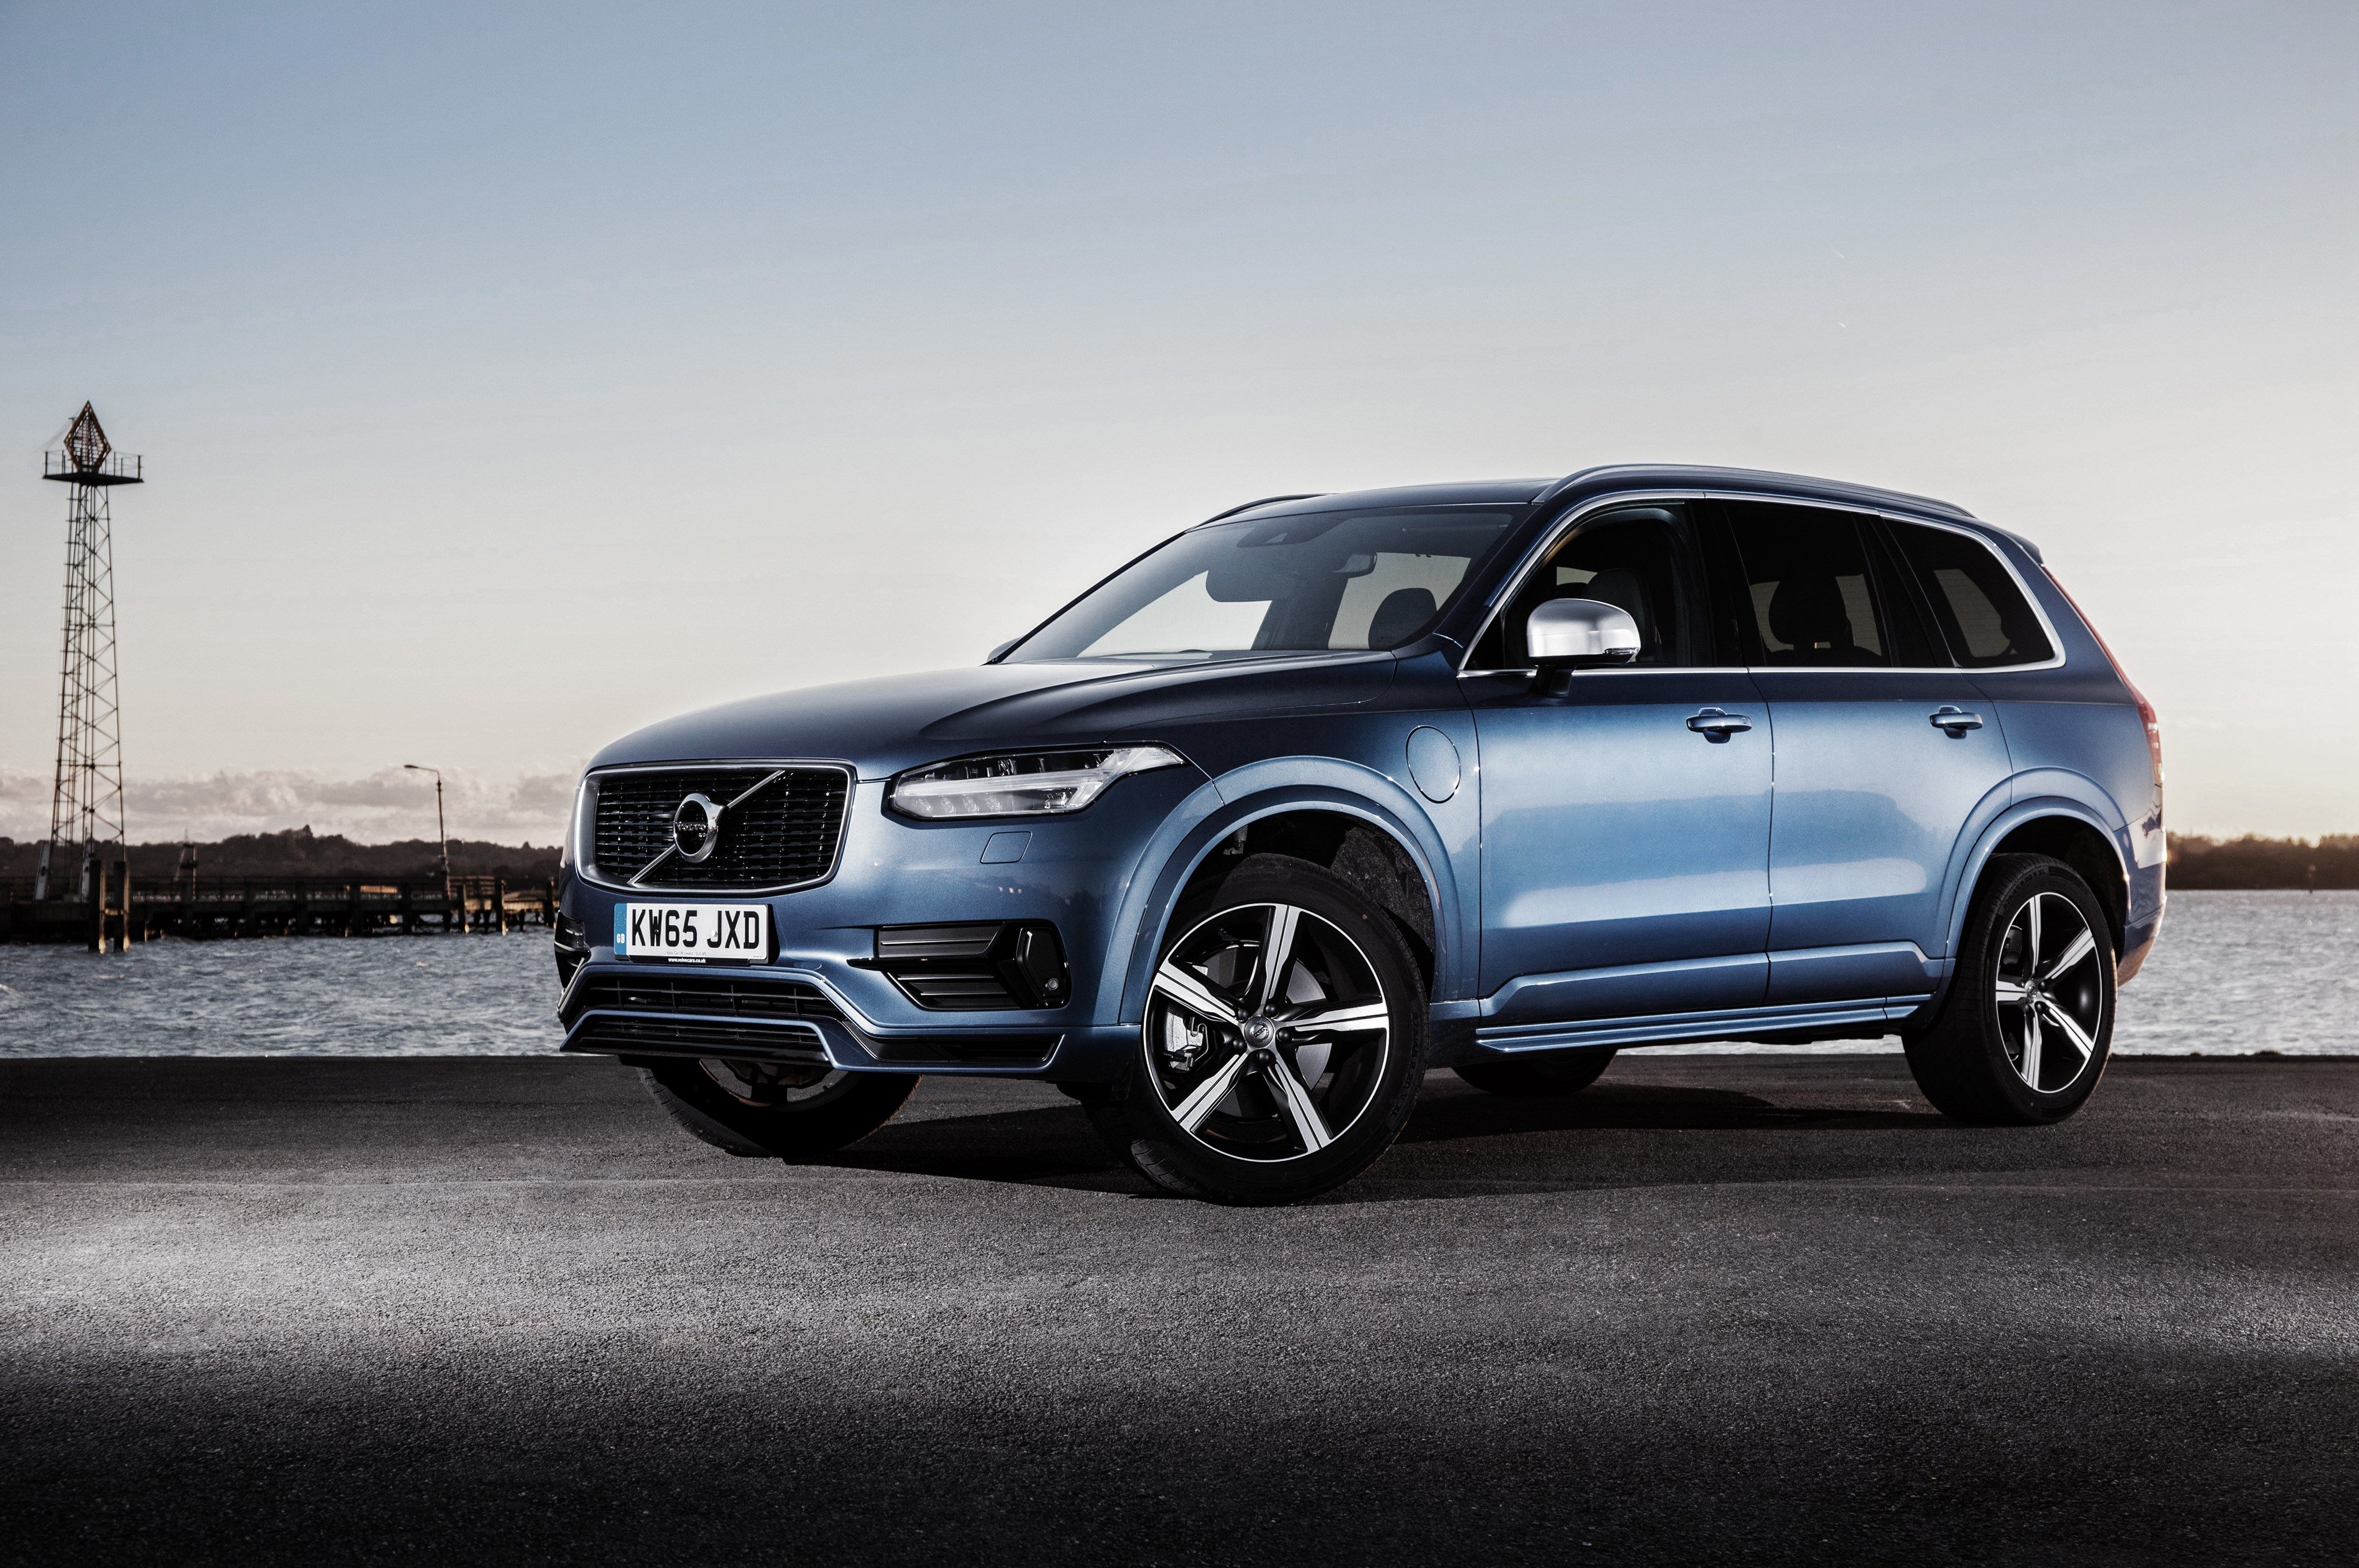 4k Wallpaper Volvo Xc90 With Image